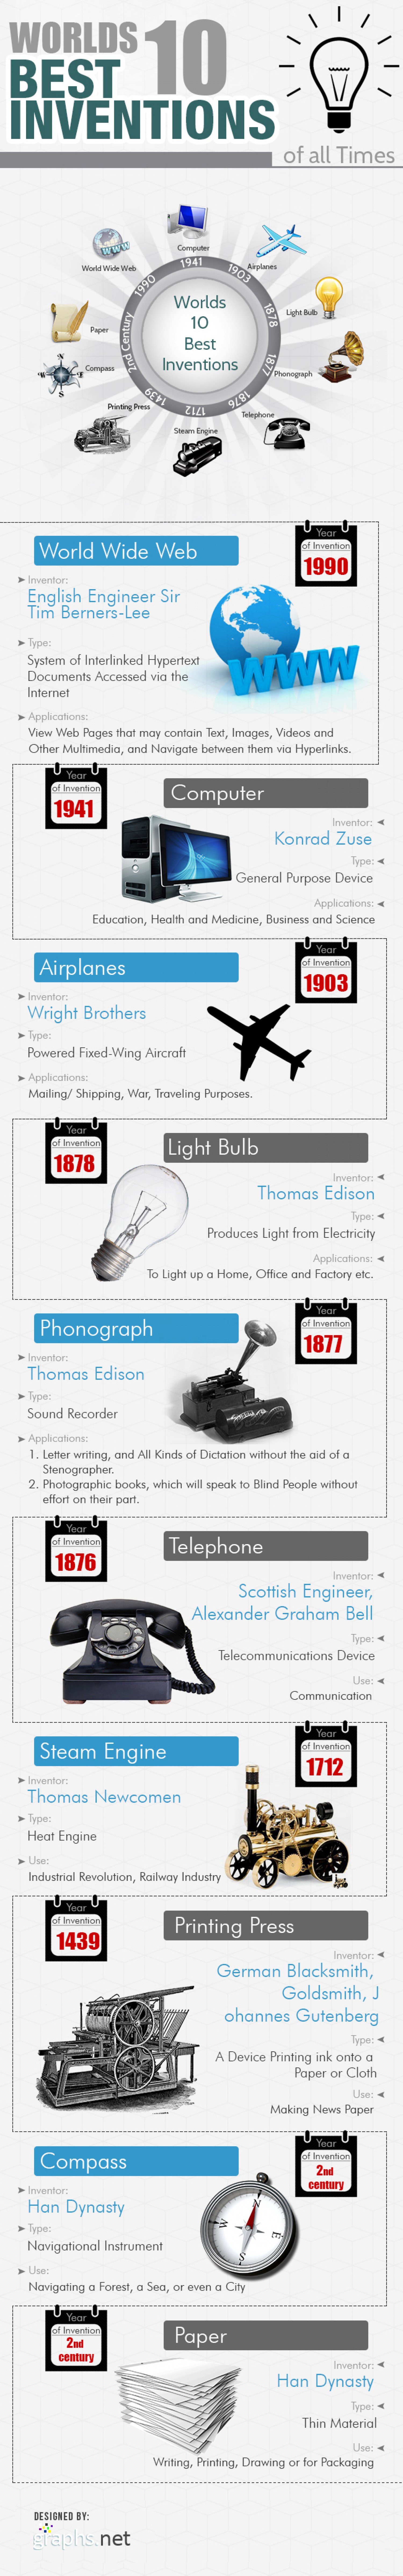 Top Inventions of All Time